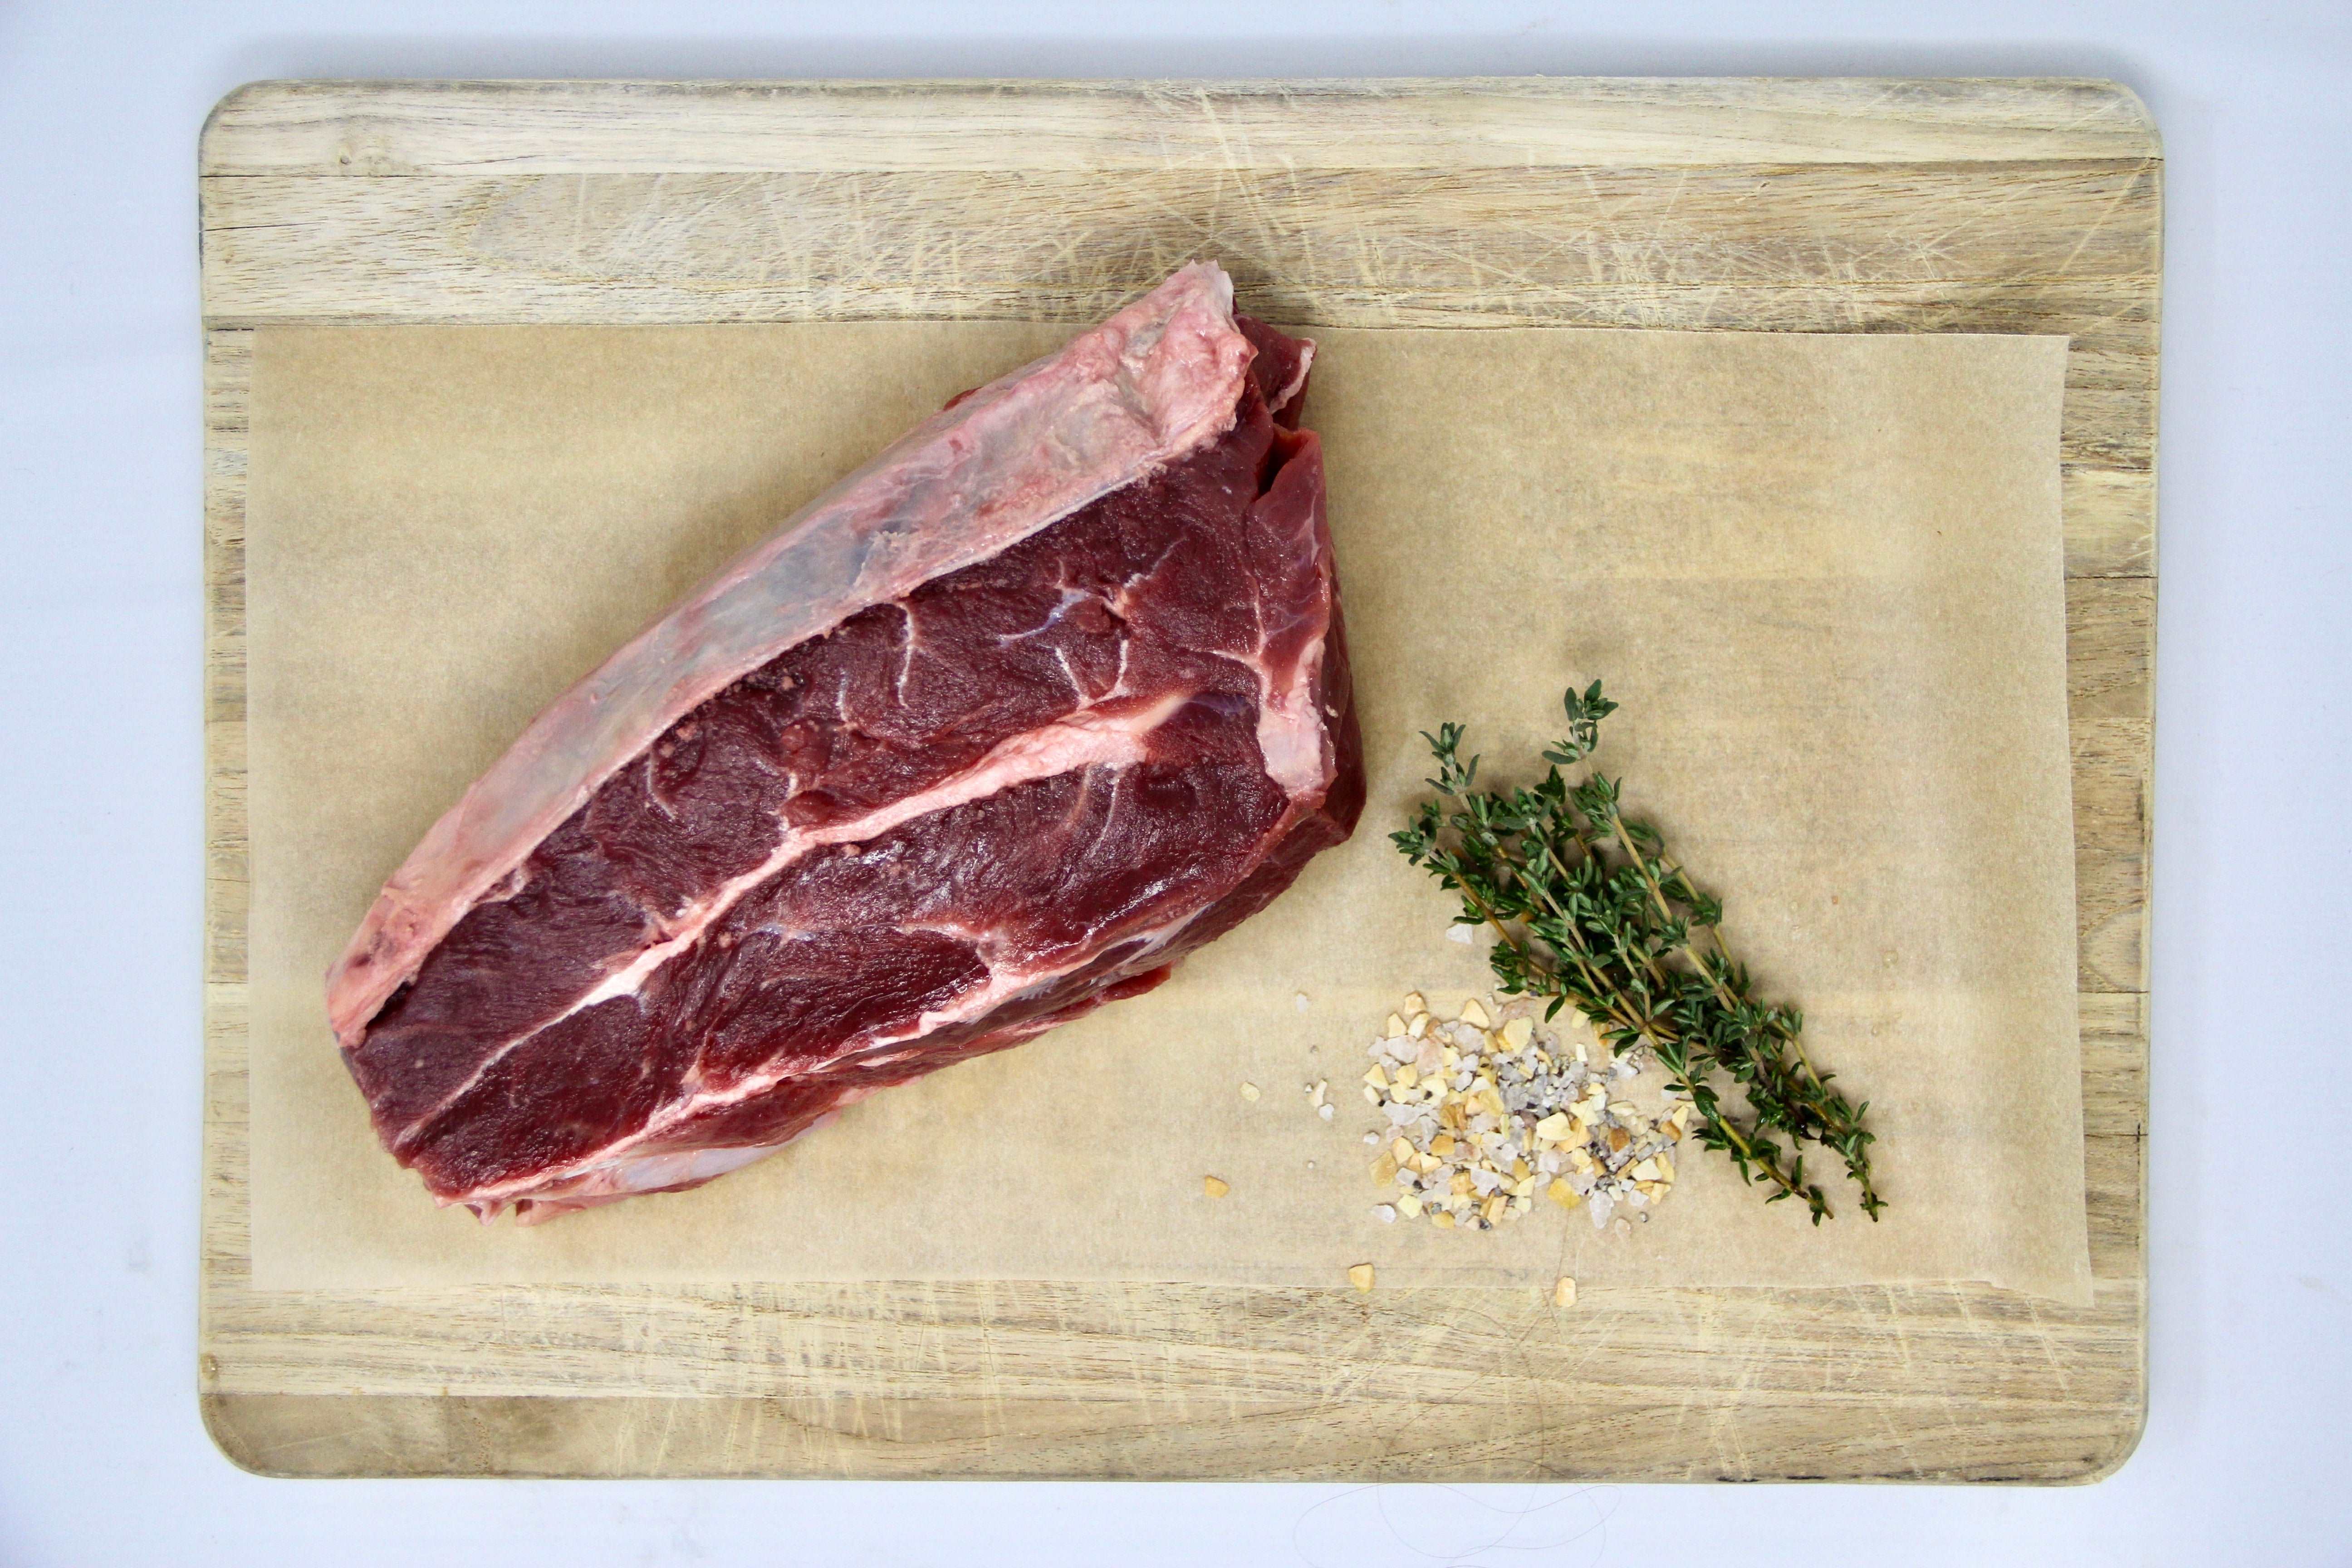 100% Grass-Fed Beef (Wagyu-Angus) Chuck Roast Uncooked Regenerative Farm Products Delivered Apsey Farms Midwest USA